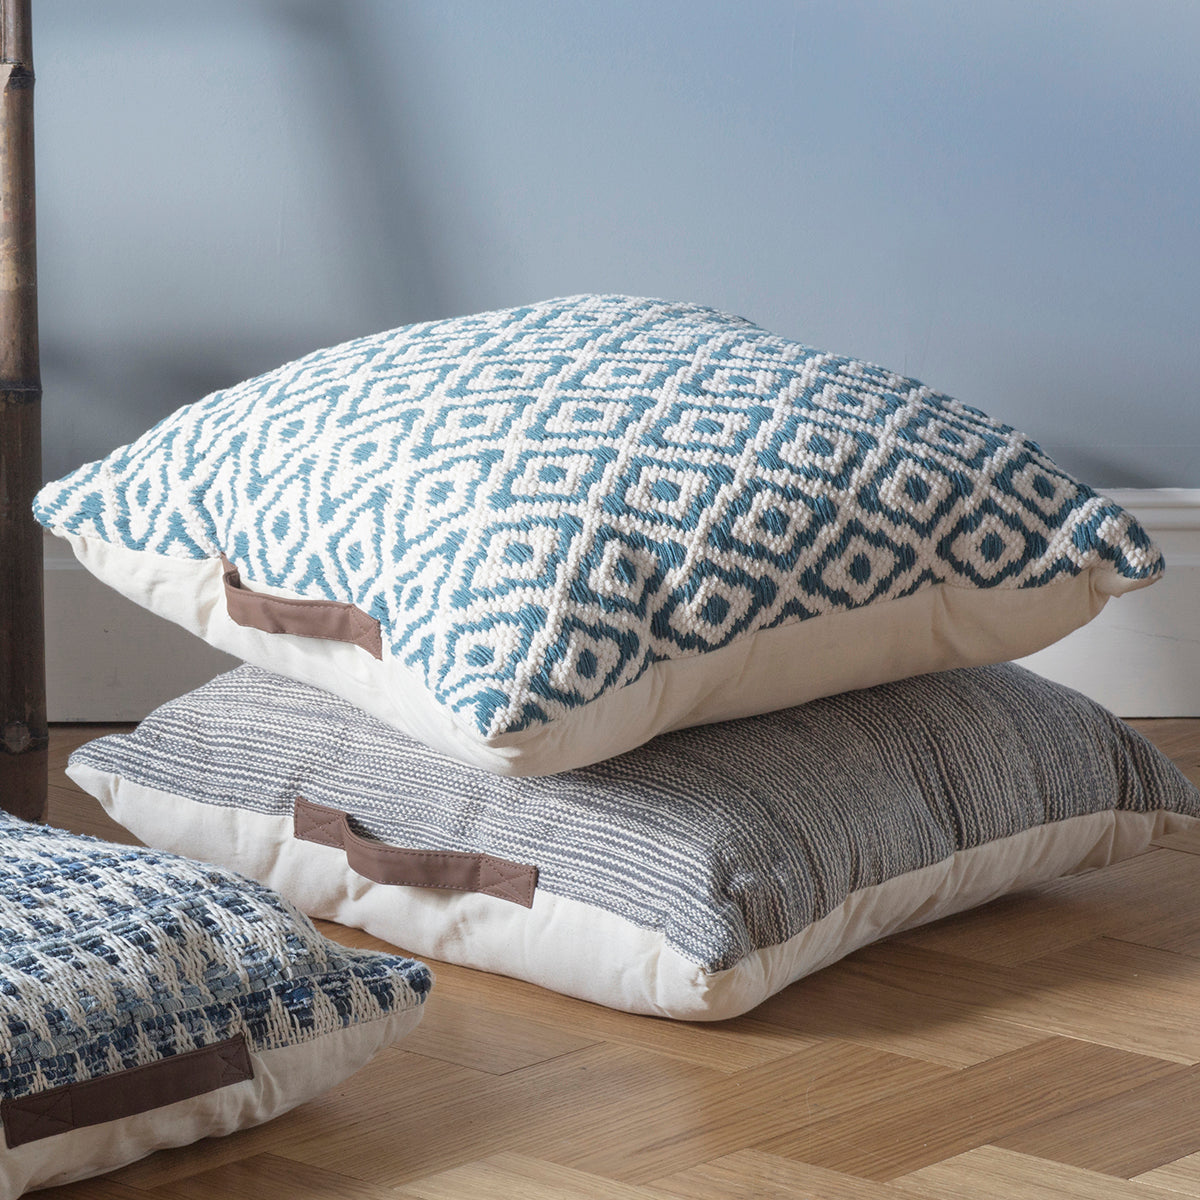 Load image into Gallery viewer, Three Sigtuna teal floor cushions add a touch of interior decor to a wooden floor.
